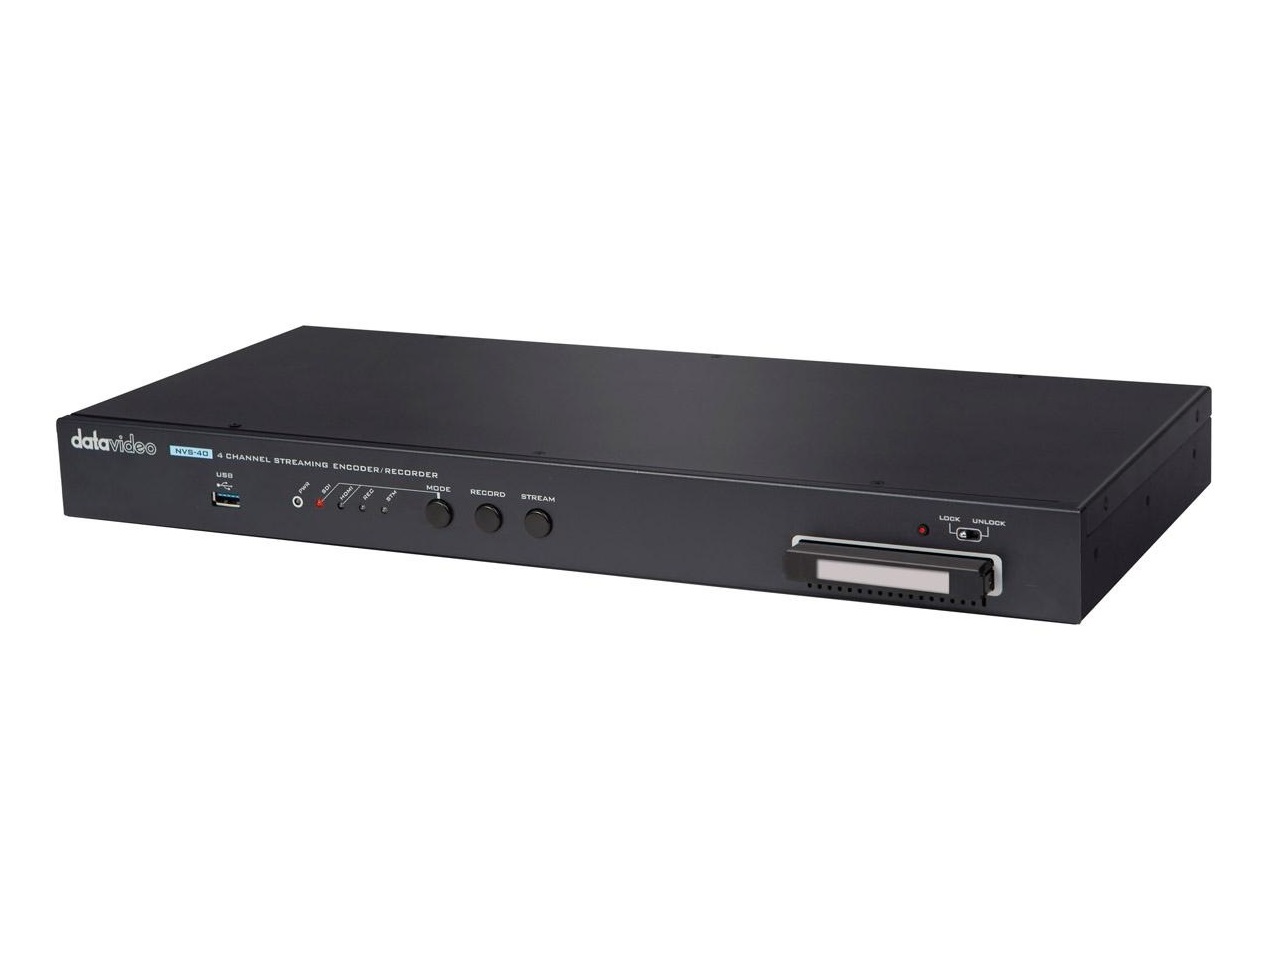 NVS-40 4 Channel Streaming Encoder/Recorder by Datavideo